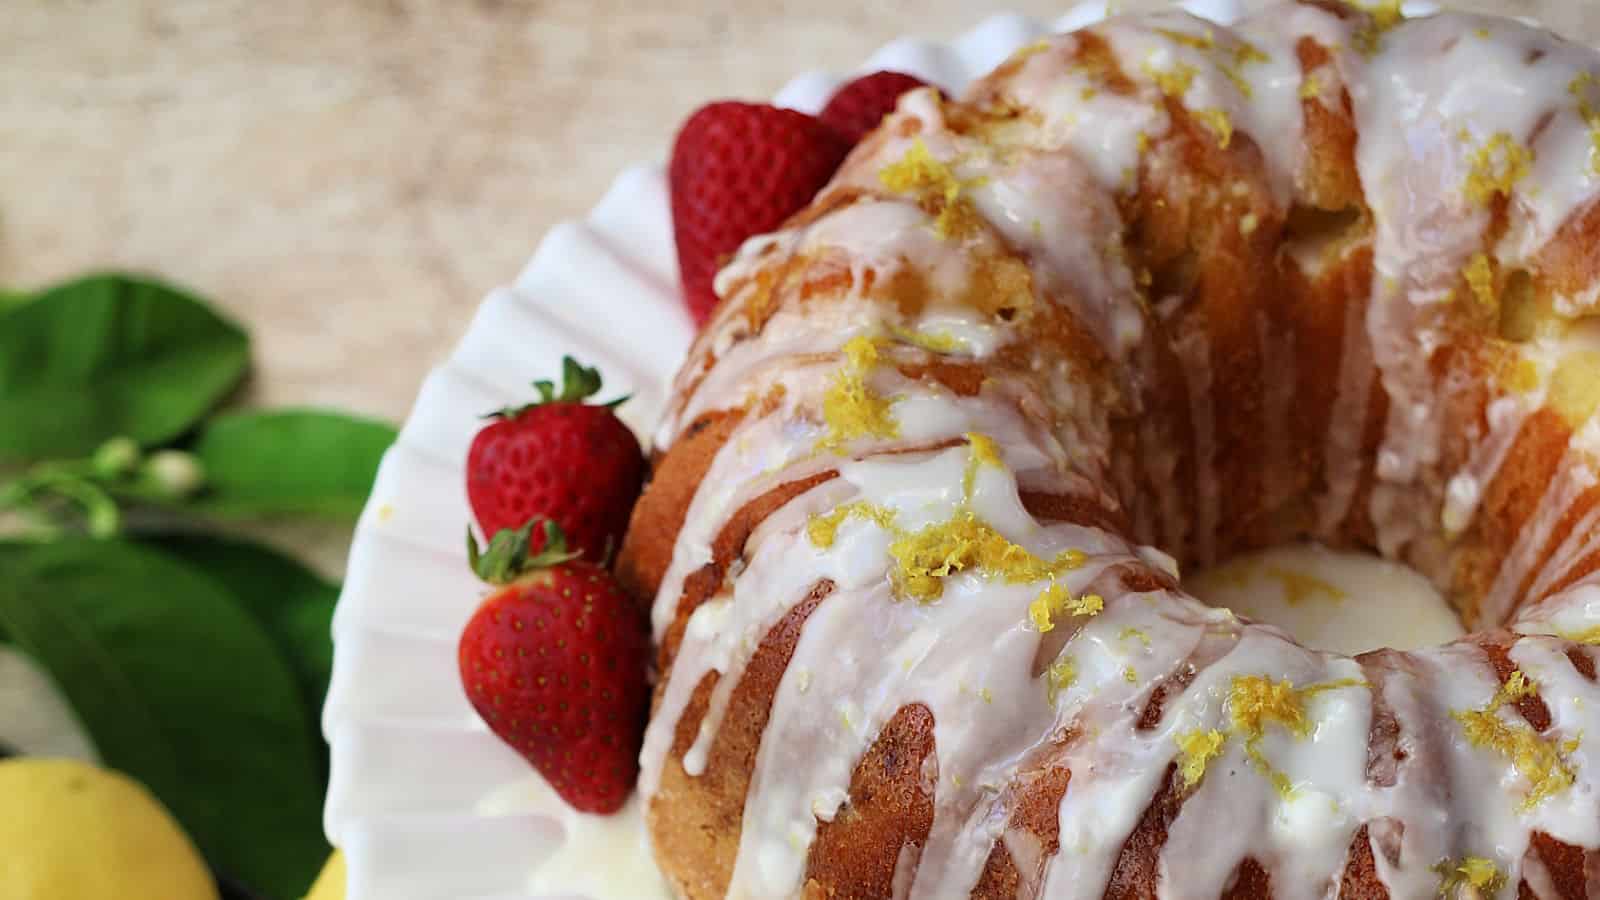 Lemon bundt cake on a white plate with strawberries.